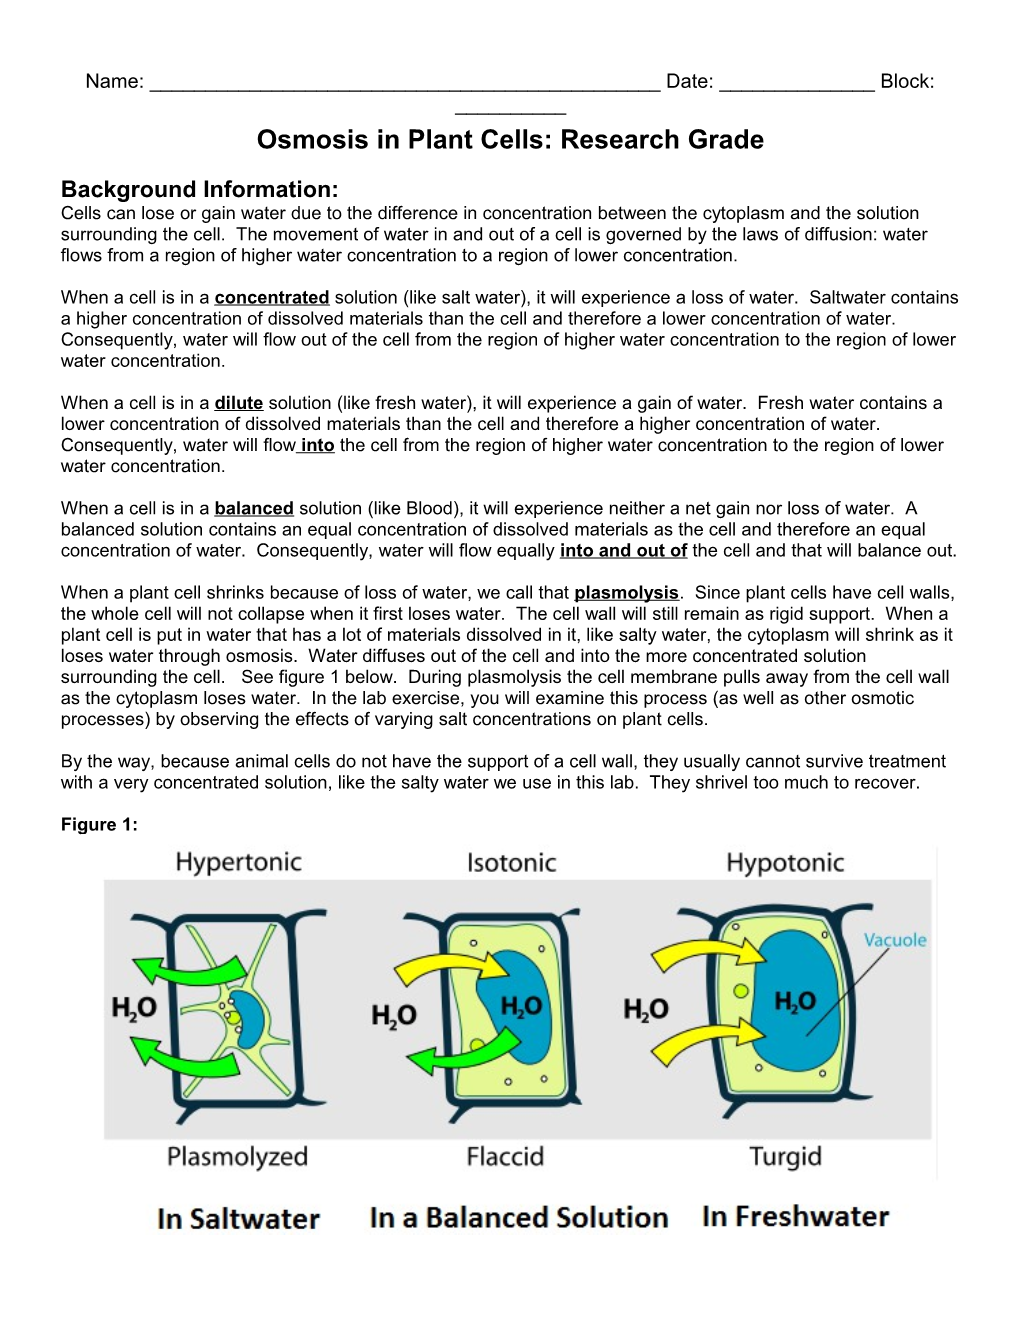 Osmosis in Plant Cells: Research Grade